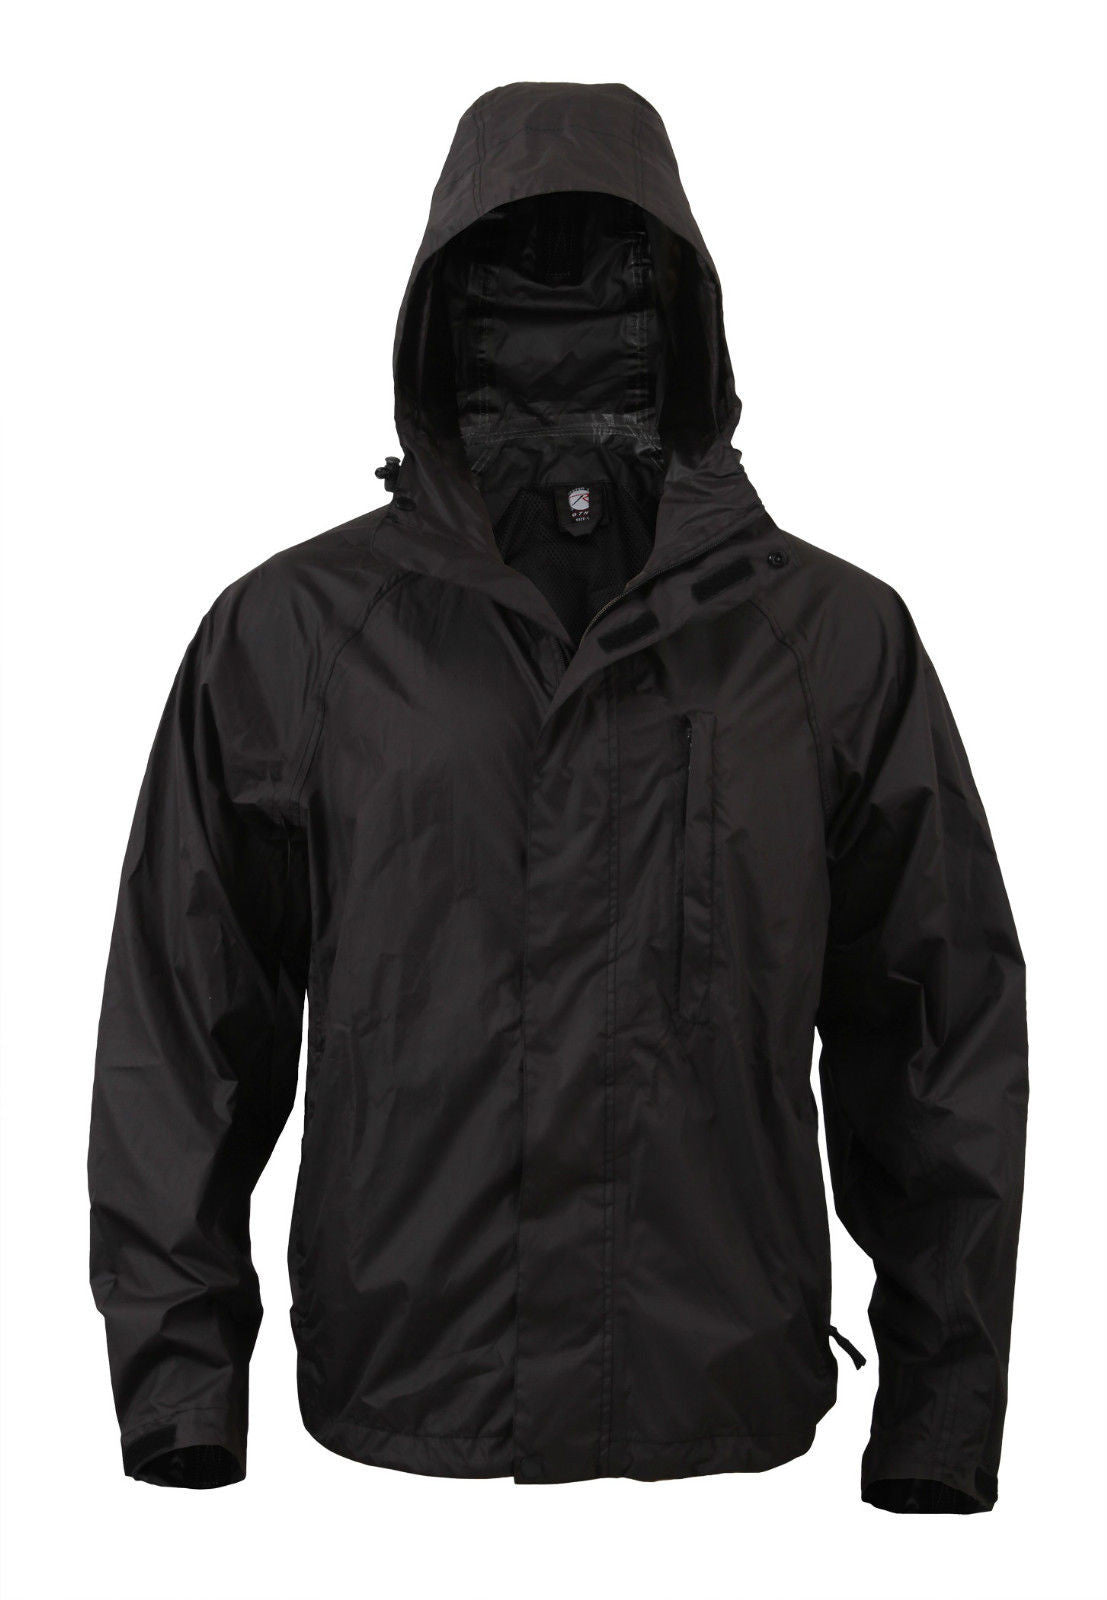 Rothco Packable Black Rain Coat Jacket - Folds into its own Pack!